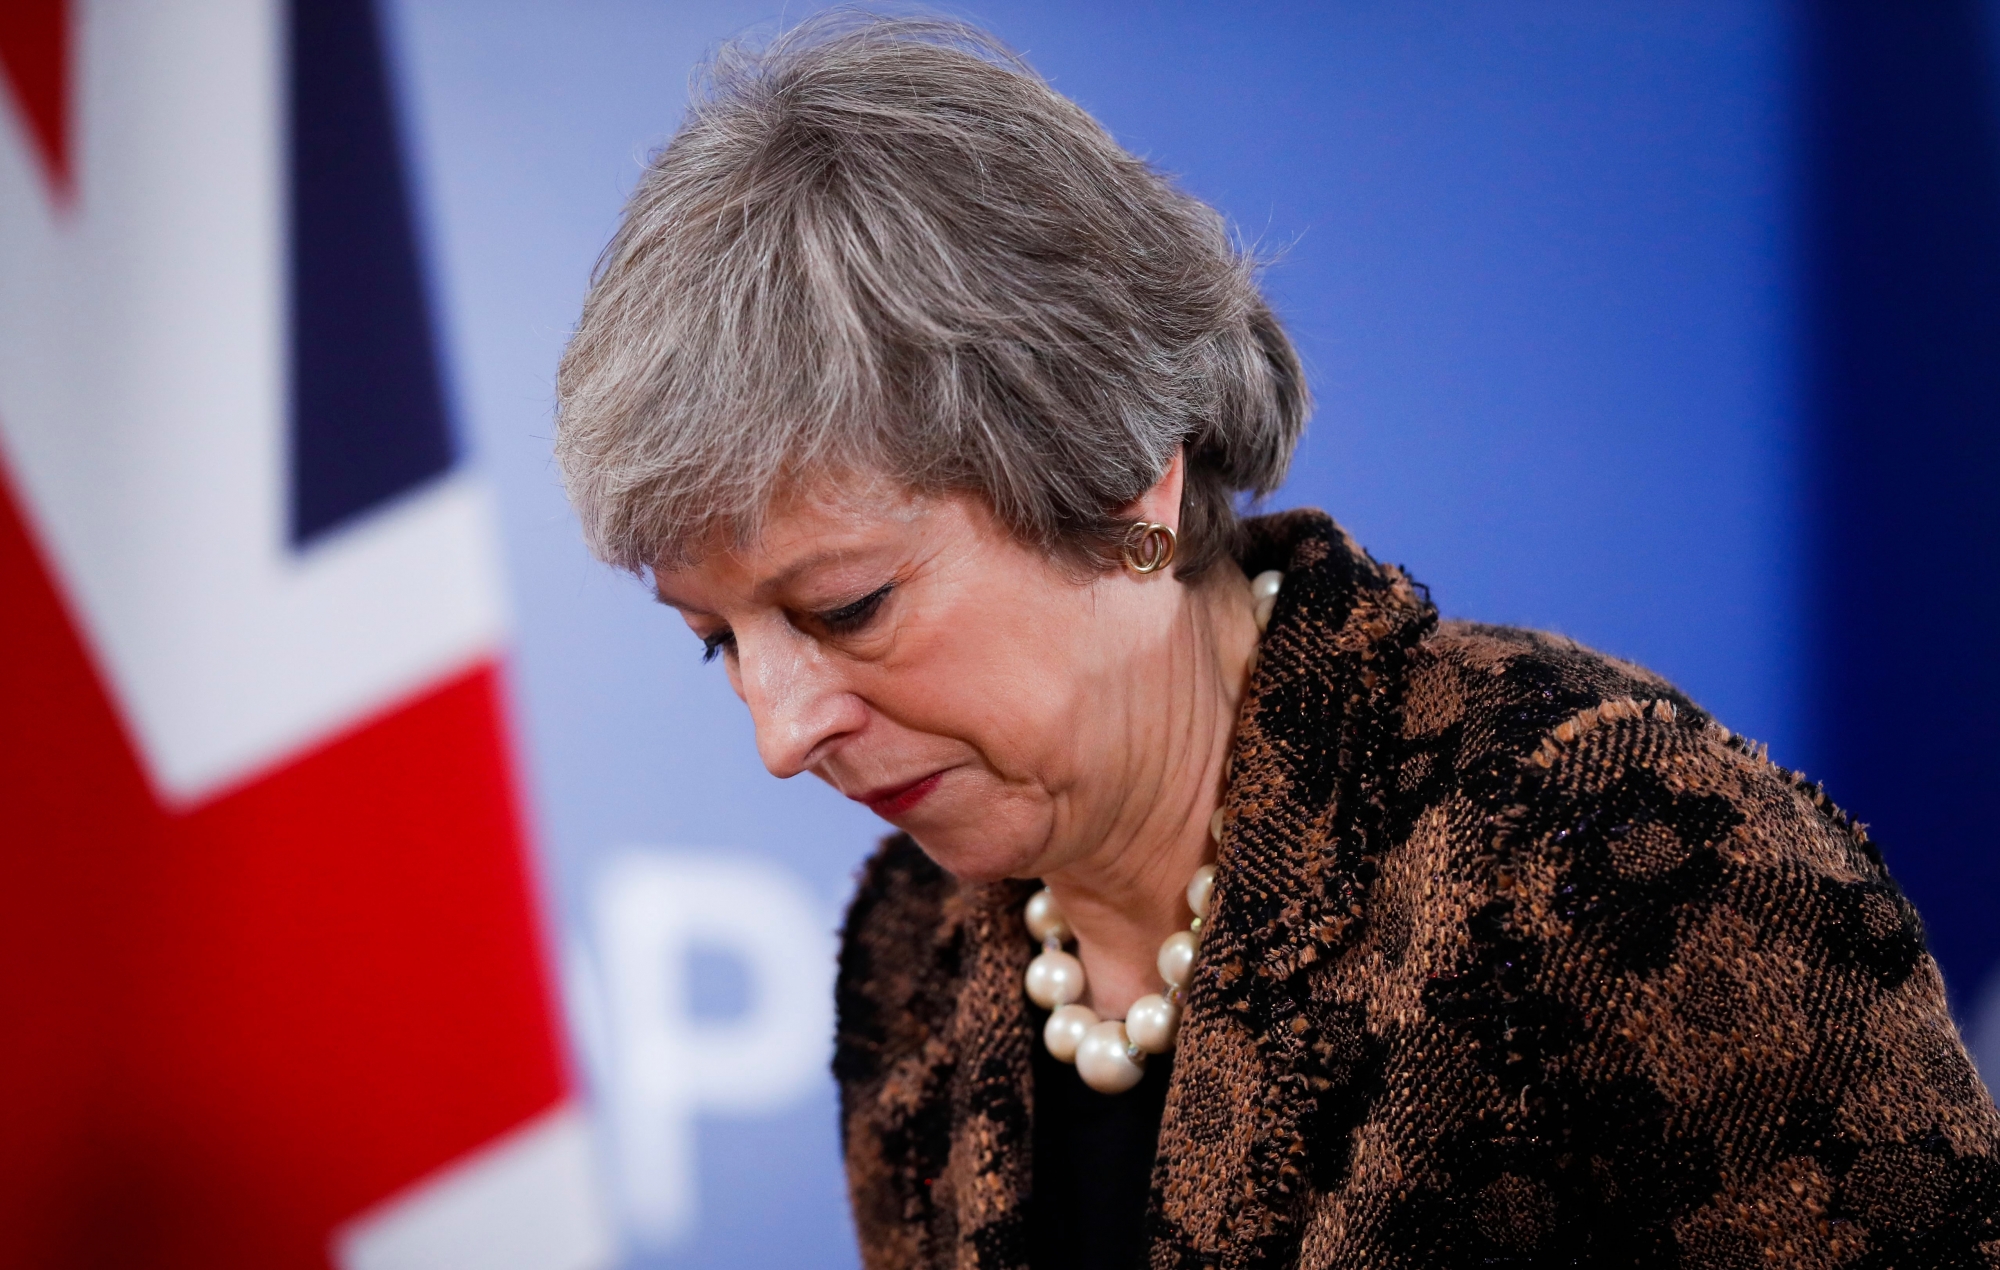 epa07230986 British Prime Minister Theresa May arrives to give a news conference at the end of the summit of EU leader in Brussels, Belgium, 14 December 2018. On the second day of summit EU leader again focussed on the conclusions on the Single Market, climate change, migration, disinformation, the fight against racism and xenophobia, and citizens' consultations.  EPA/OLIVIER HOSLET BELGIUM EU COUNCIL SUMMIT